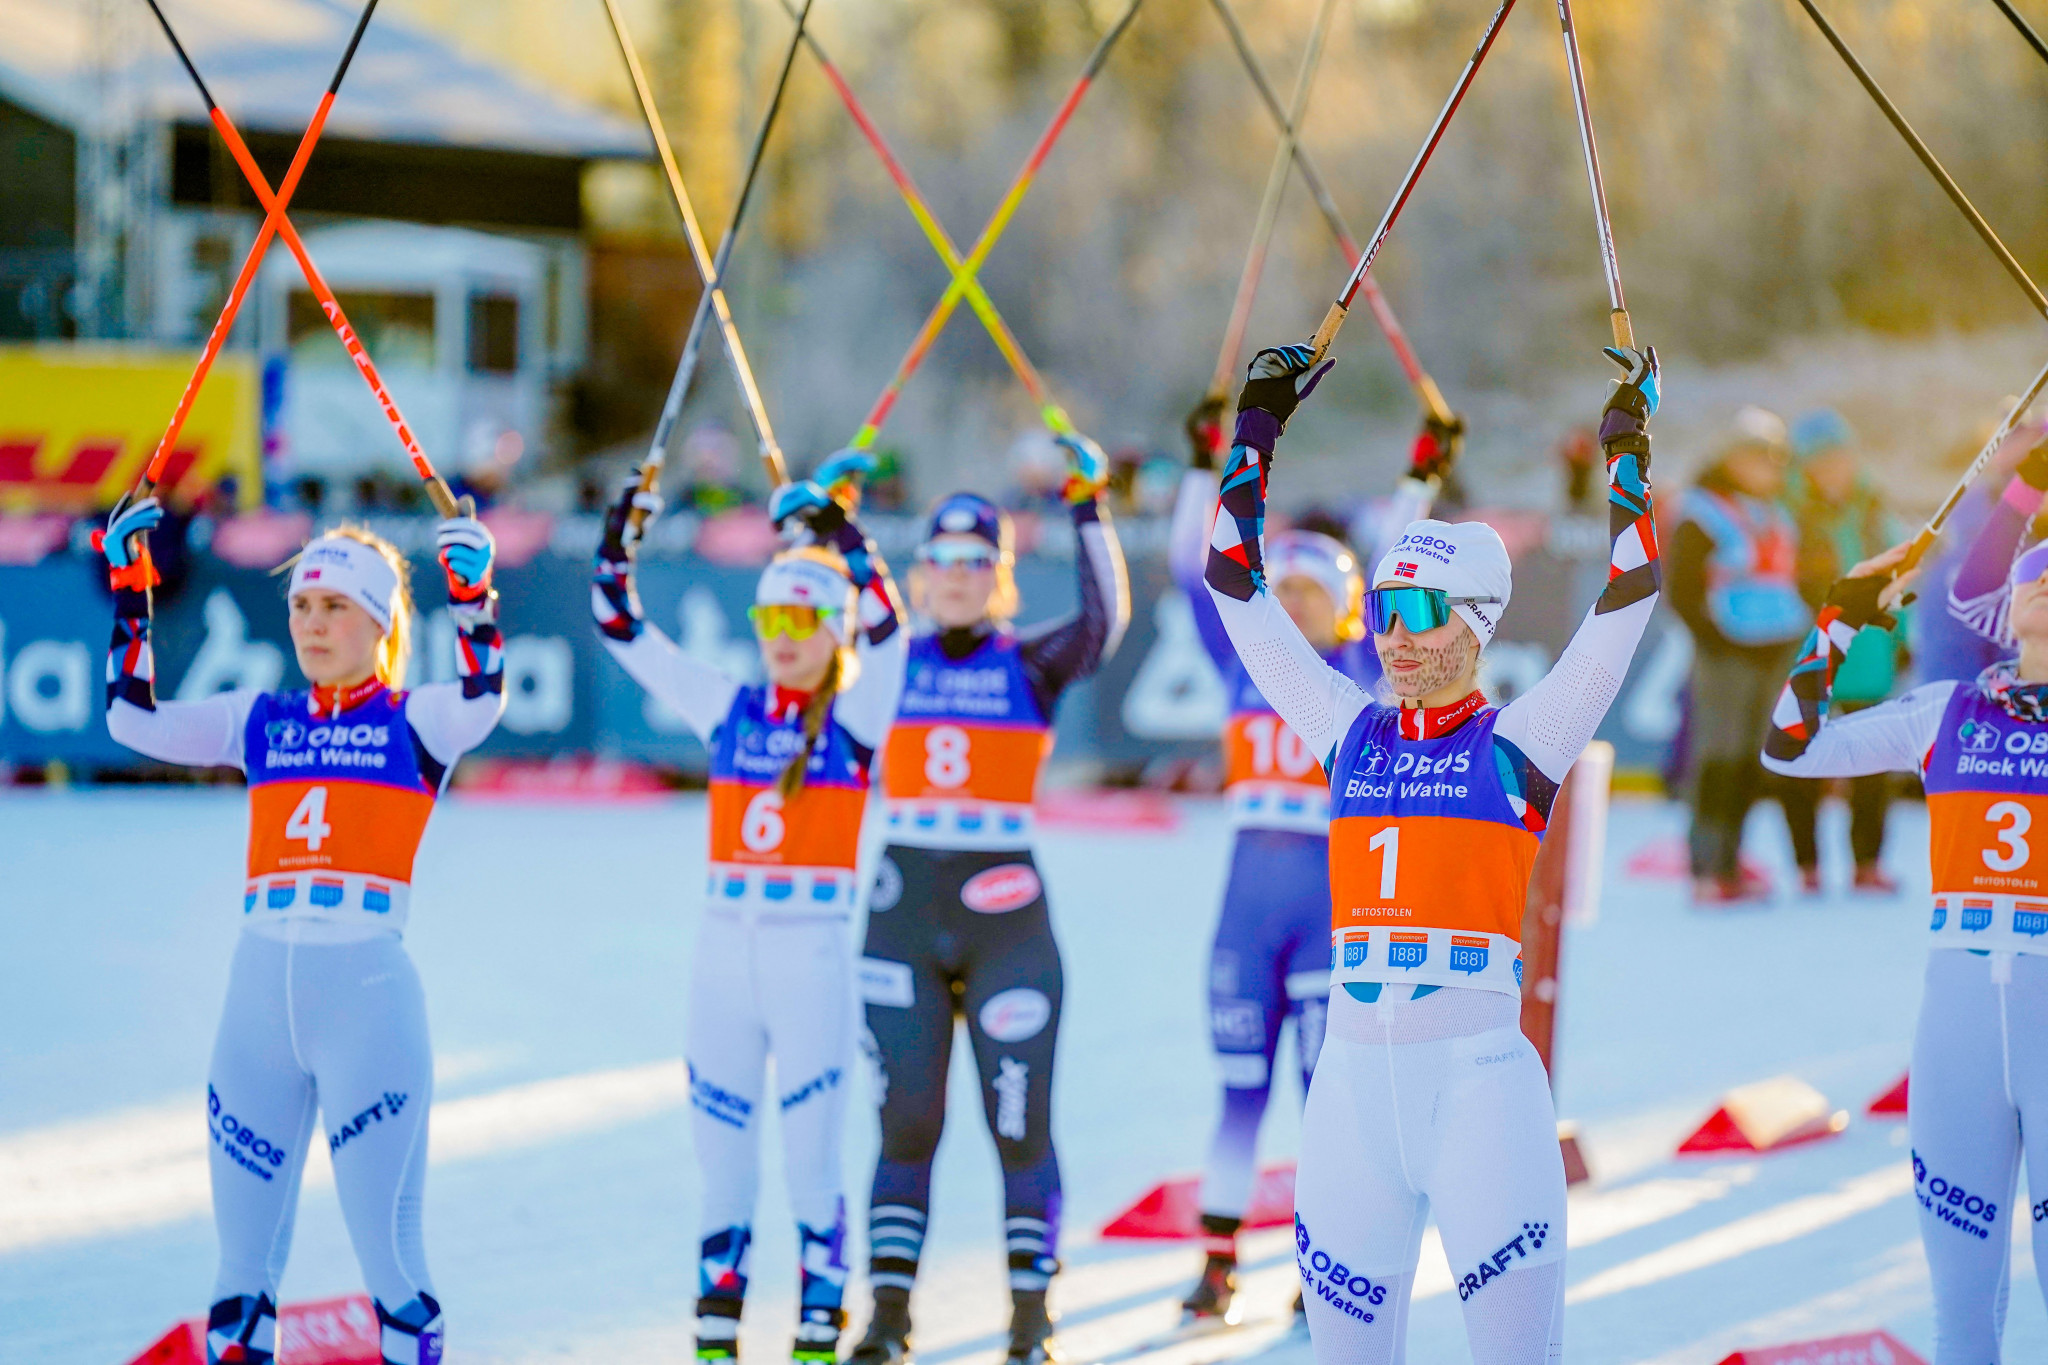 Skiers at a national race in Norway raised their poles in an X sign in protest at the exclusion of women's Nordic combined from Milan Cortina 2026 ©Getty Images